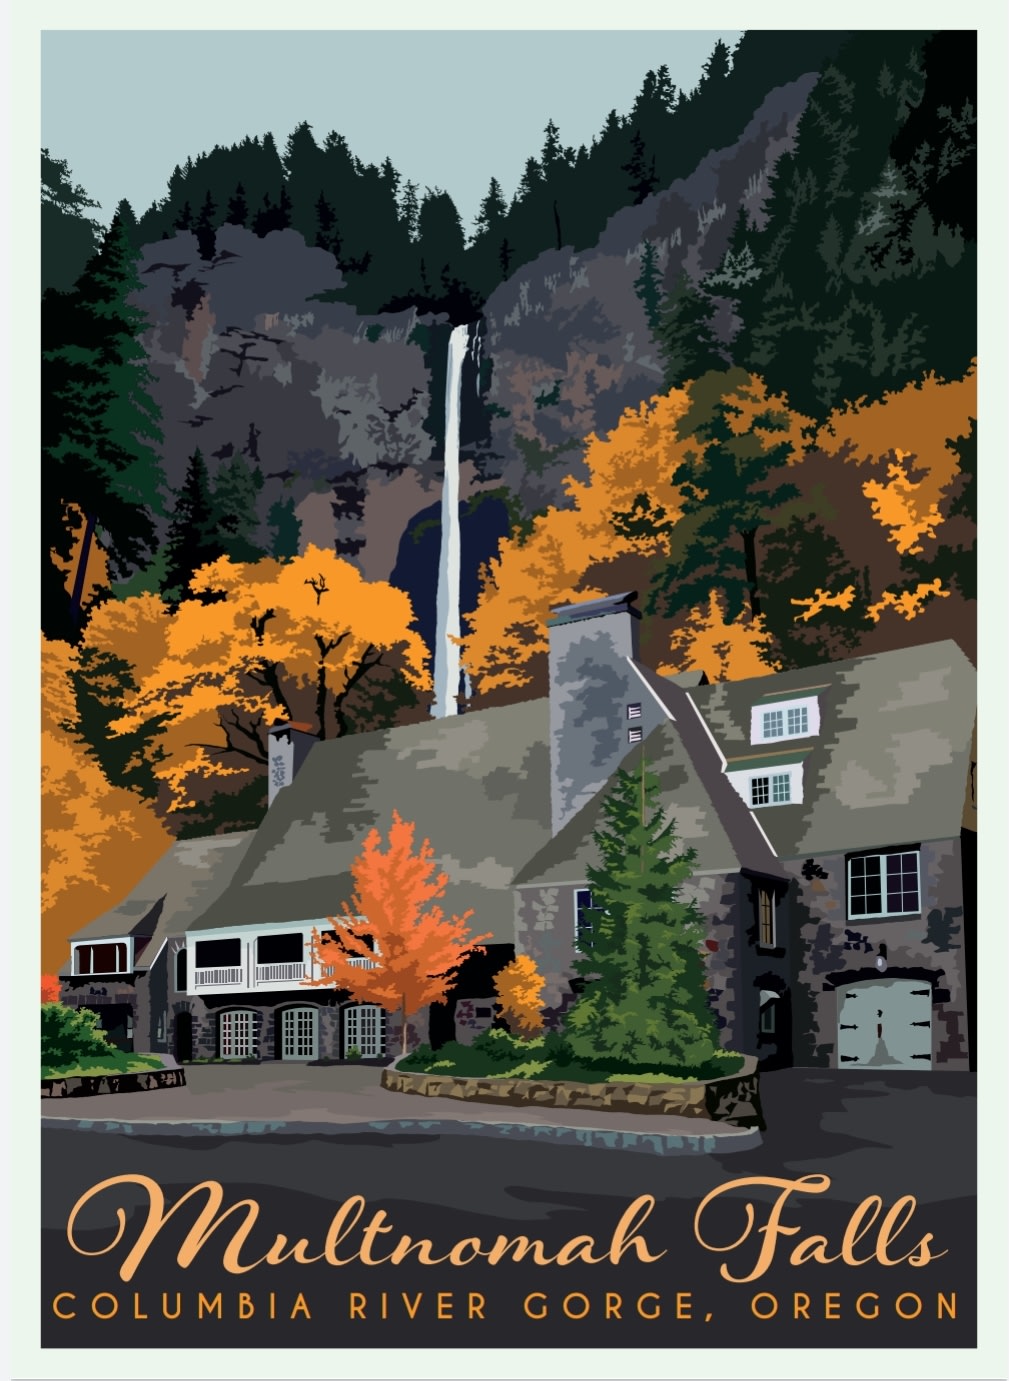 I'm an illustrator who does work for national parks and museums. This was a recent piece which didn't make the cut due to not showing the falls enough, but I wanted to share anyway.